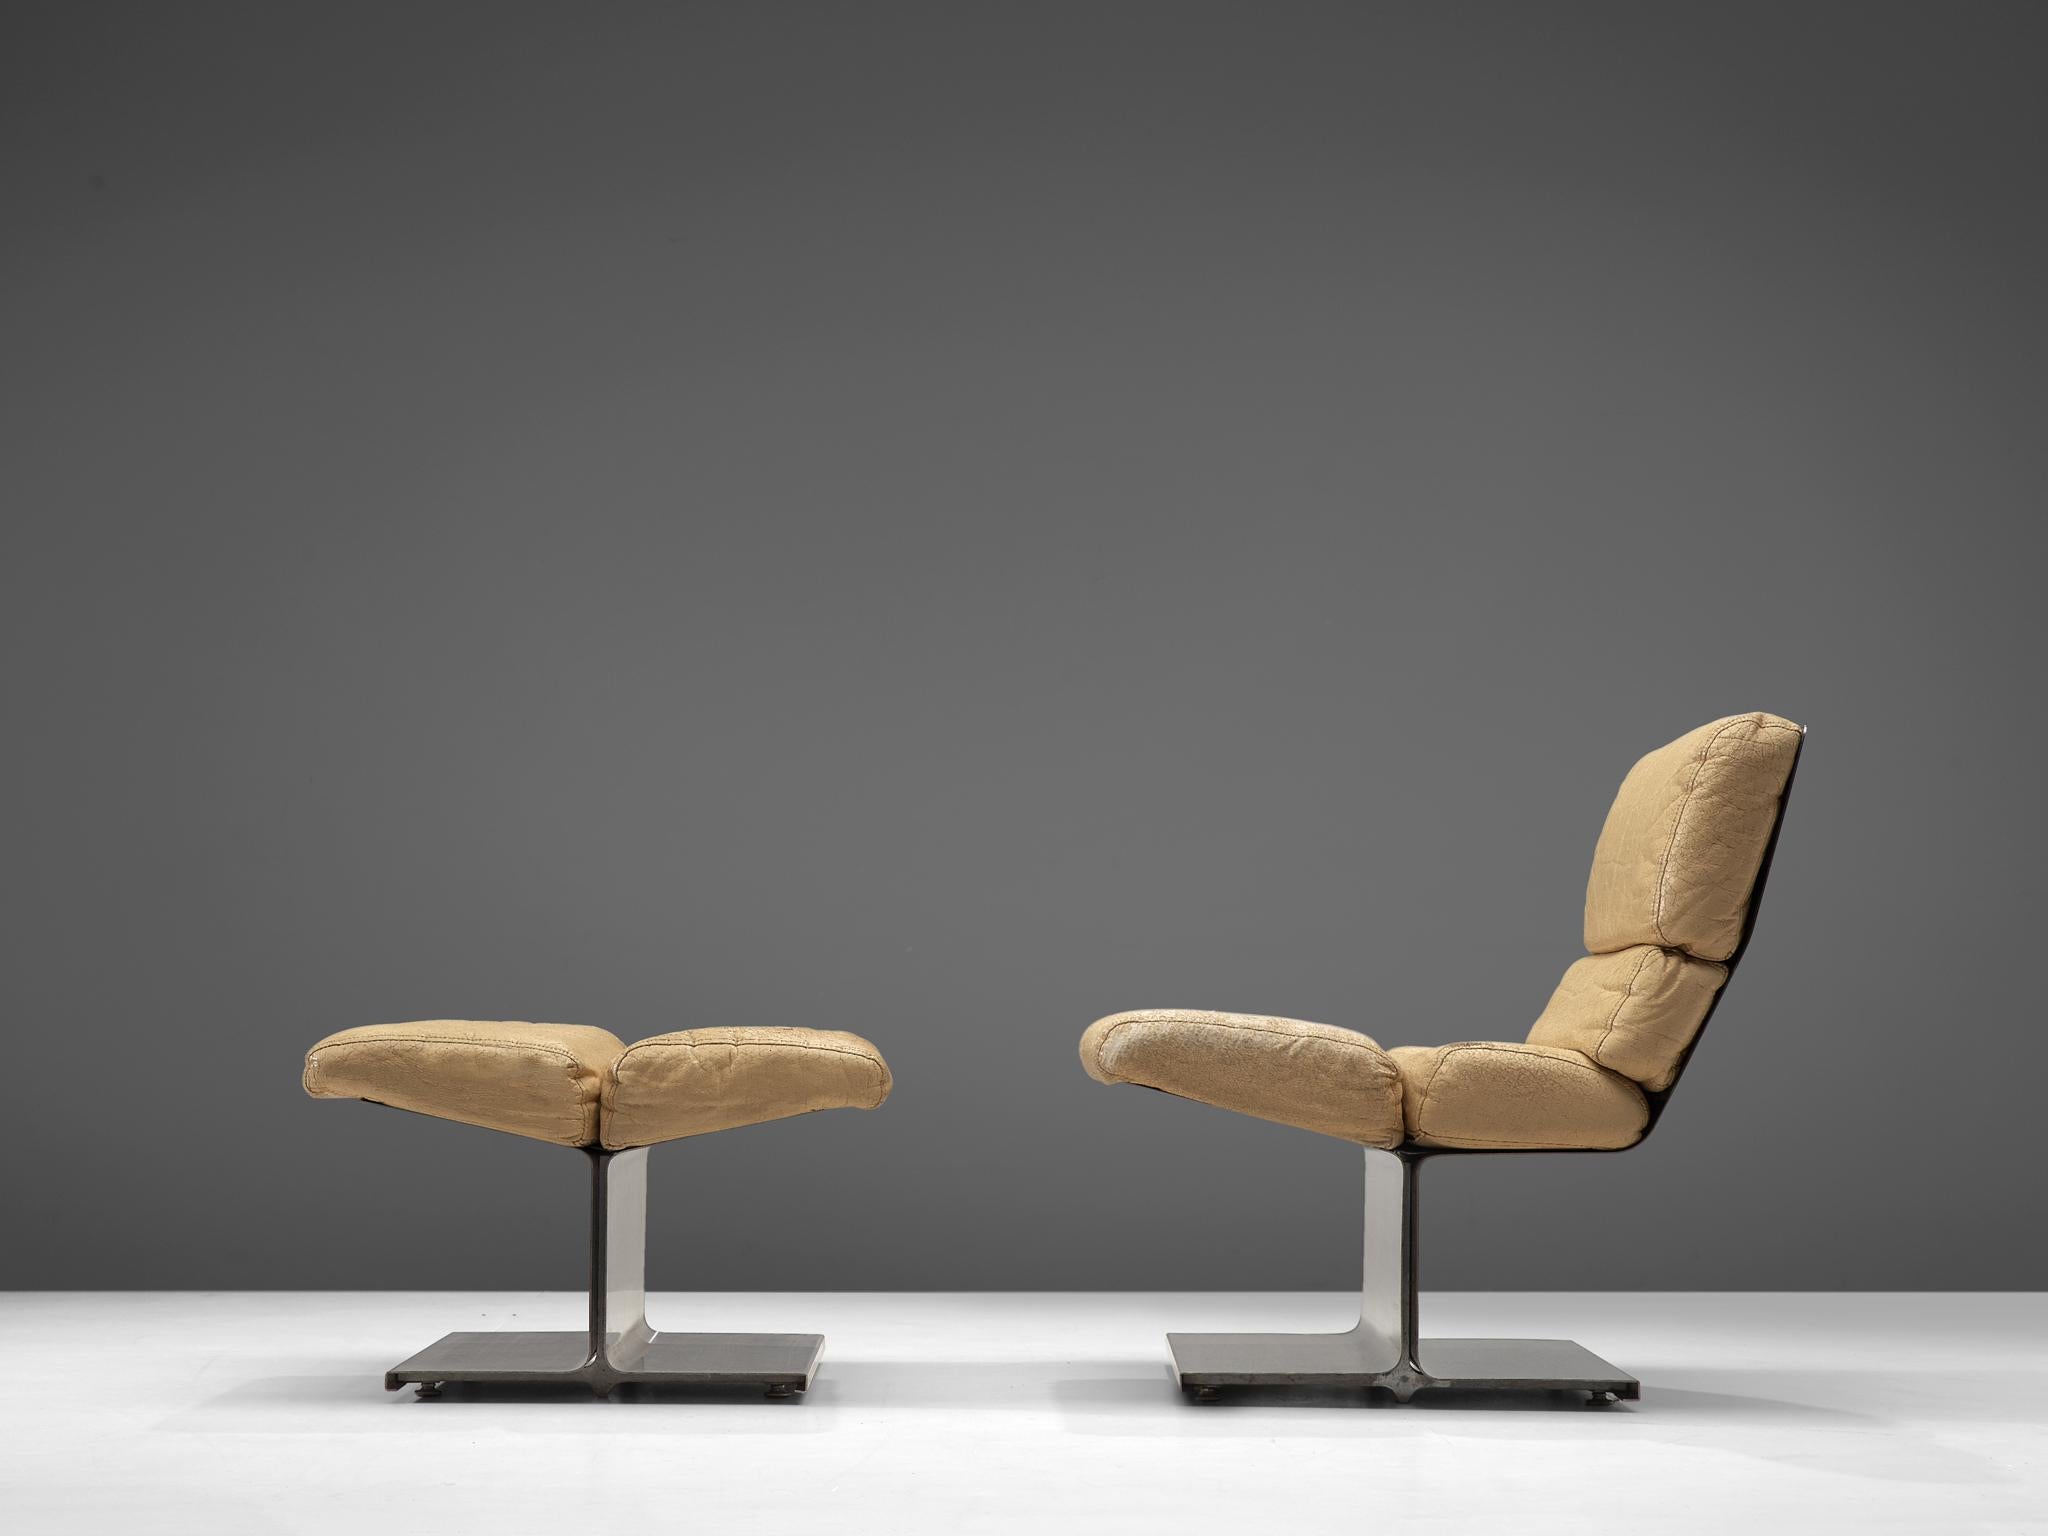 François Monnet for Kappa, lounge chair with ottoman, stainless steel and leather, France, circa 1970.

Modern lounge set by the French designer François Monnet, consisting of an easy chair and a stool. Monnet worked on incorporating steel into his